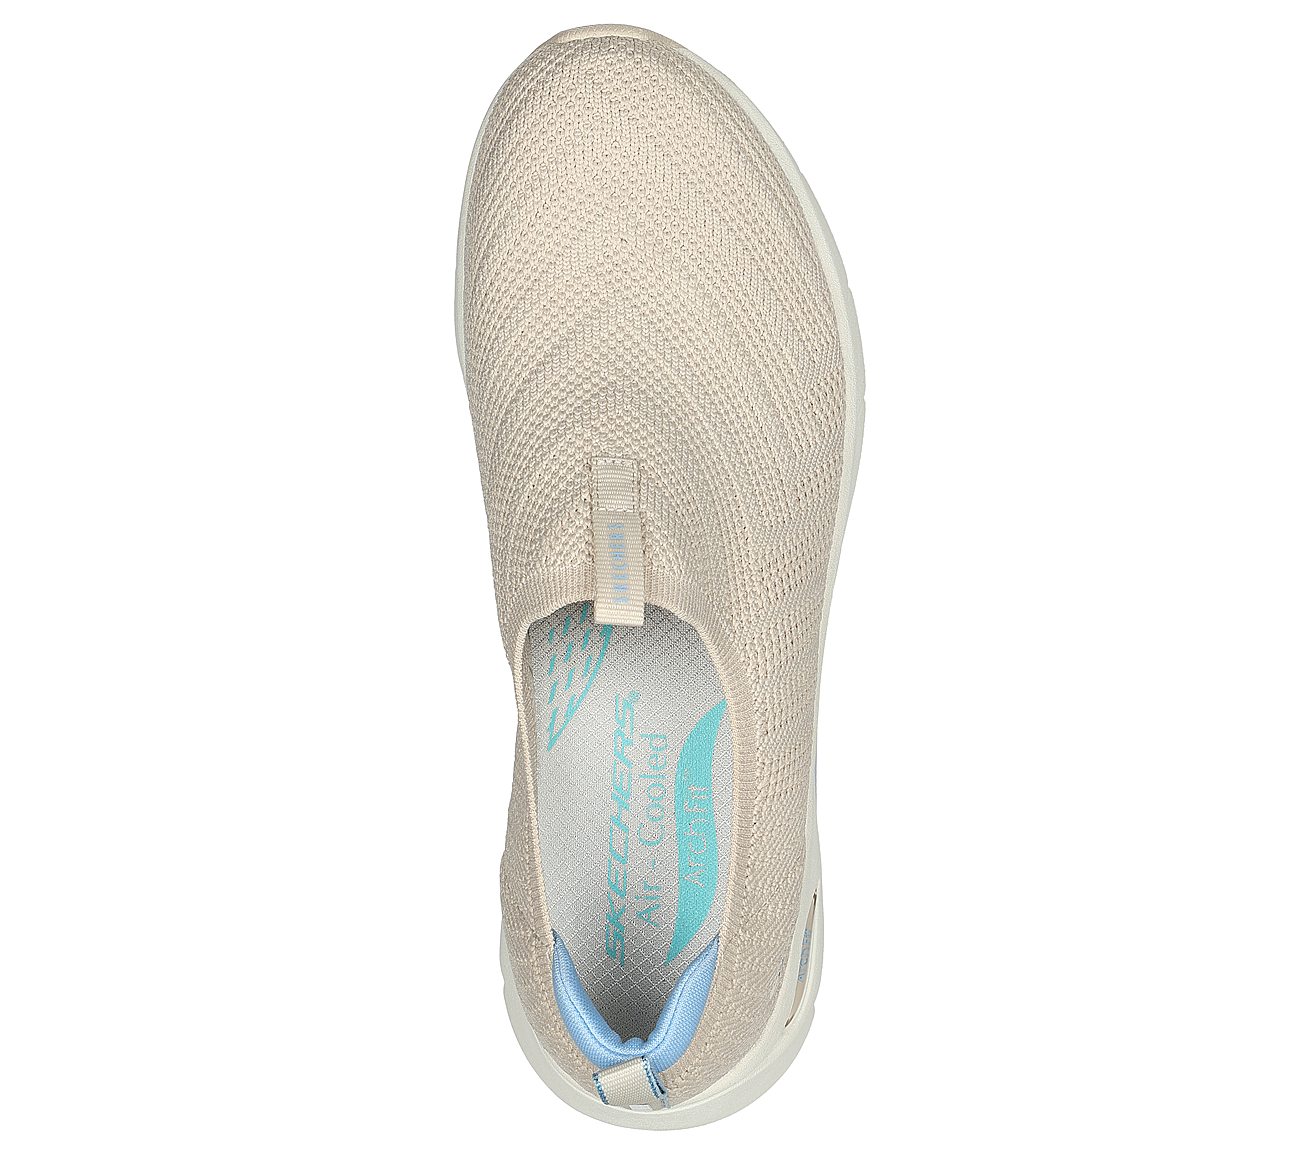 SKECH-AIR ARCH FIT - TOP PICK, NATURAL/BLUE Footwear Top View